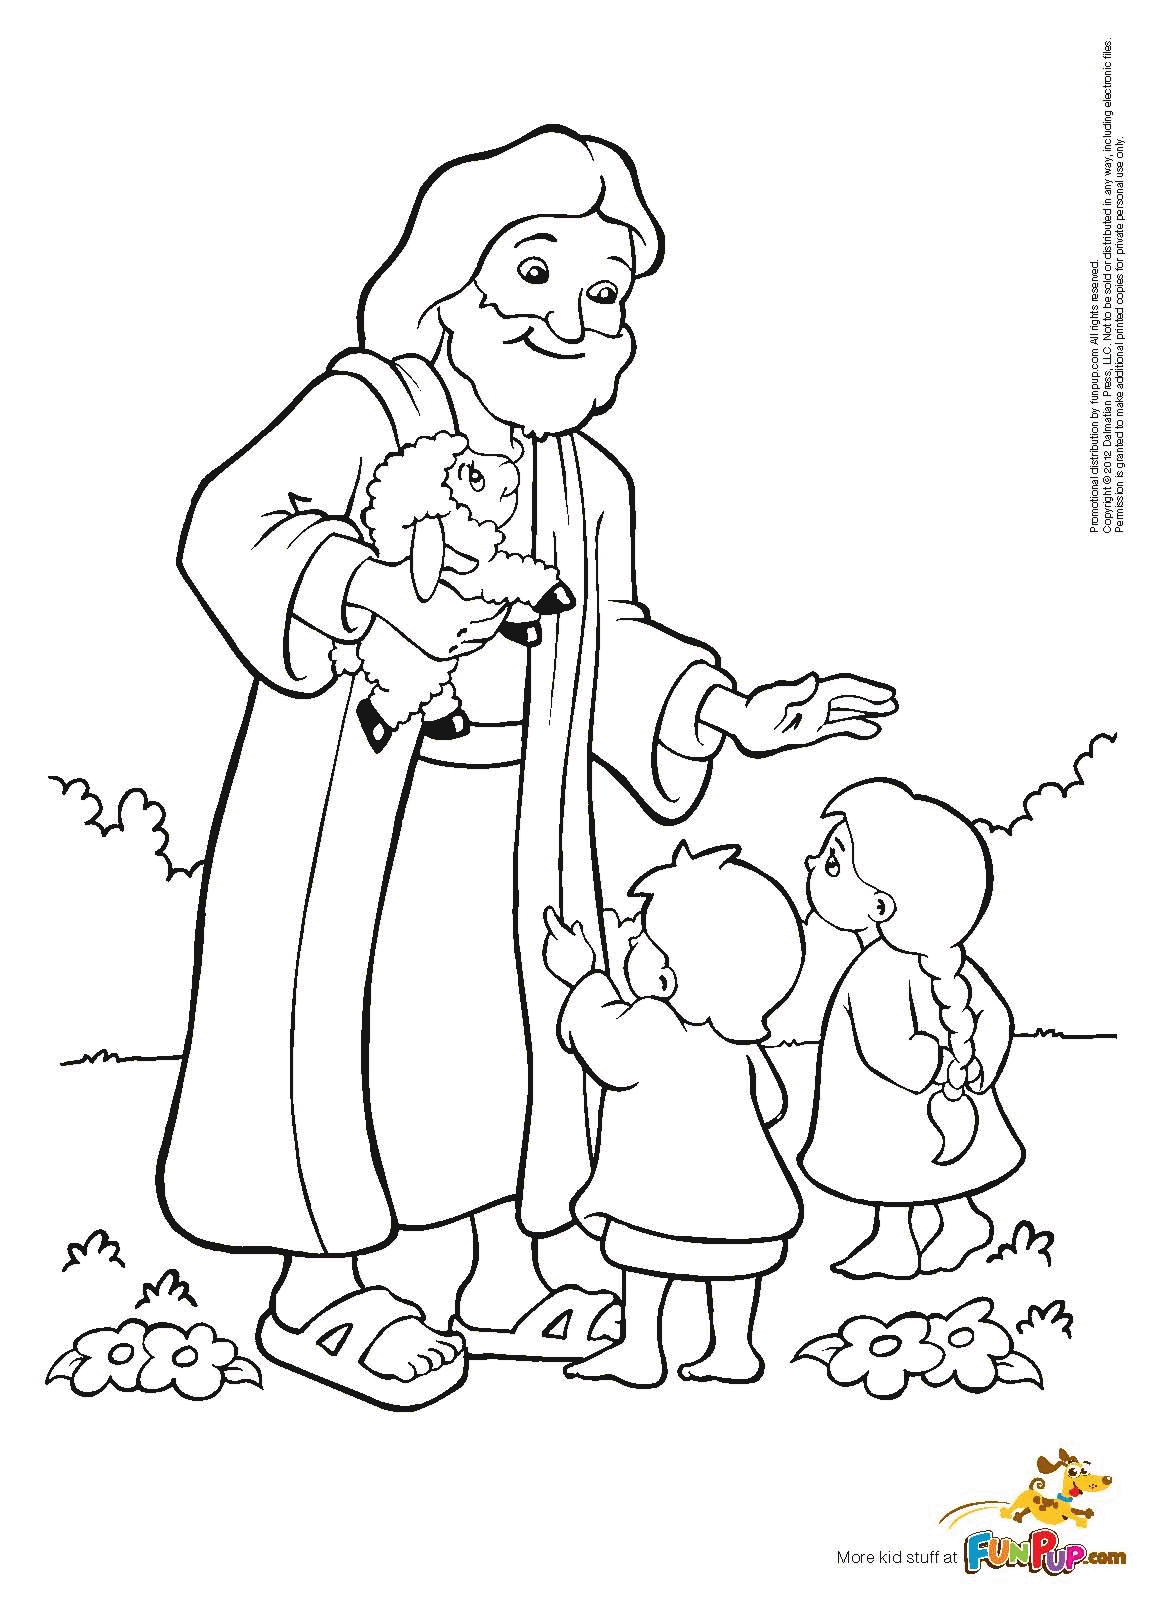 happy birthday jesus coloring pages | Only Coloring Pages